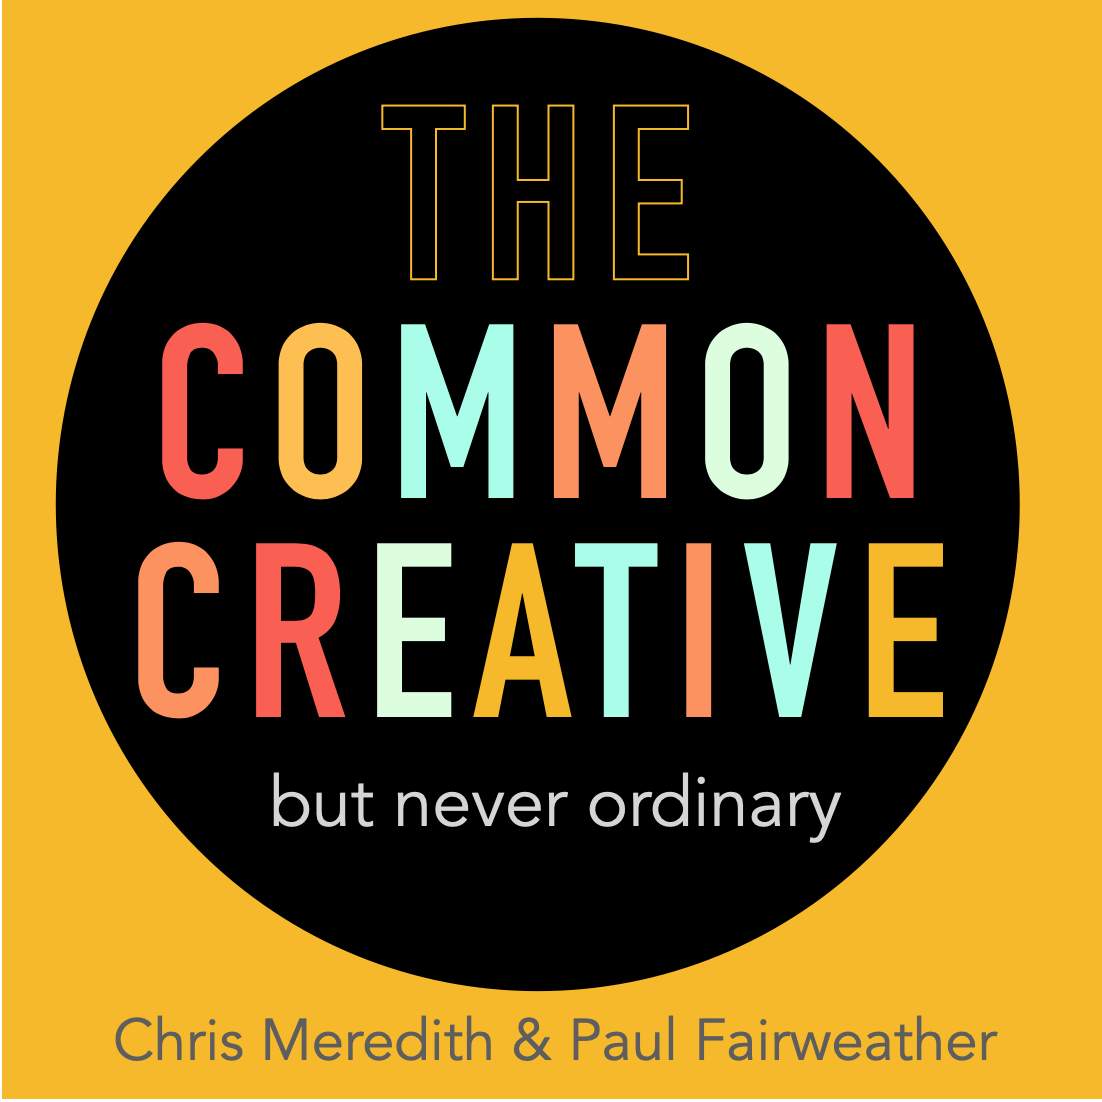 Episode 15 - Enid Fairweather: The Arts and Craft of Creativity